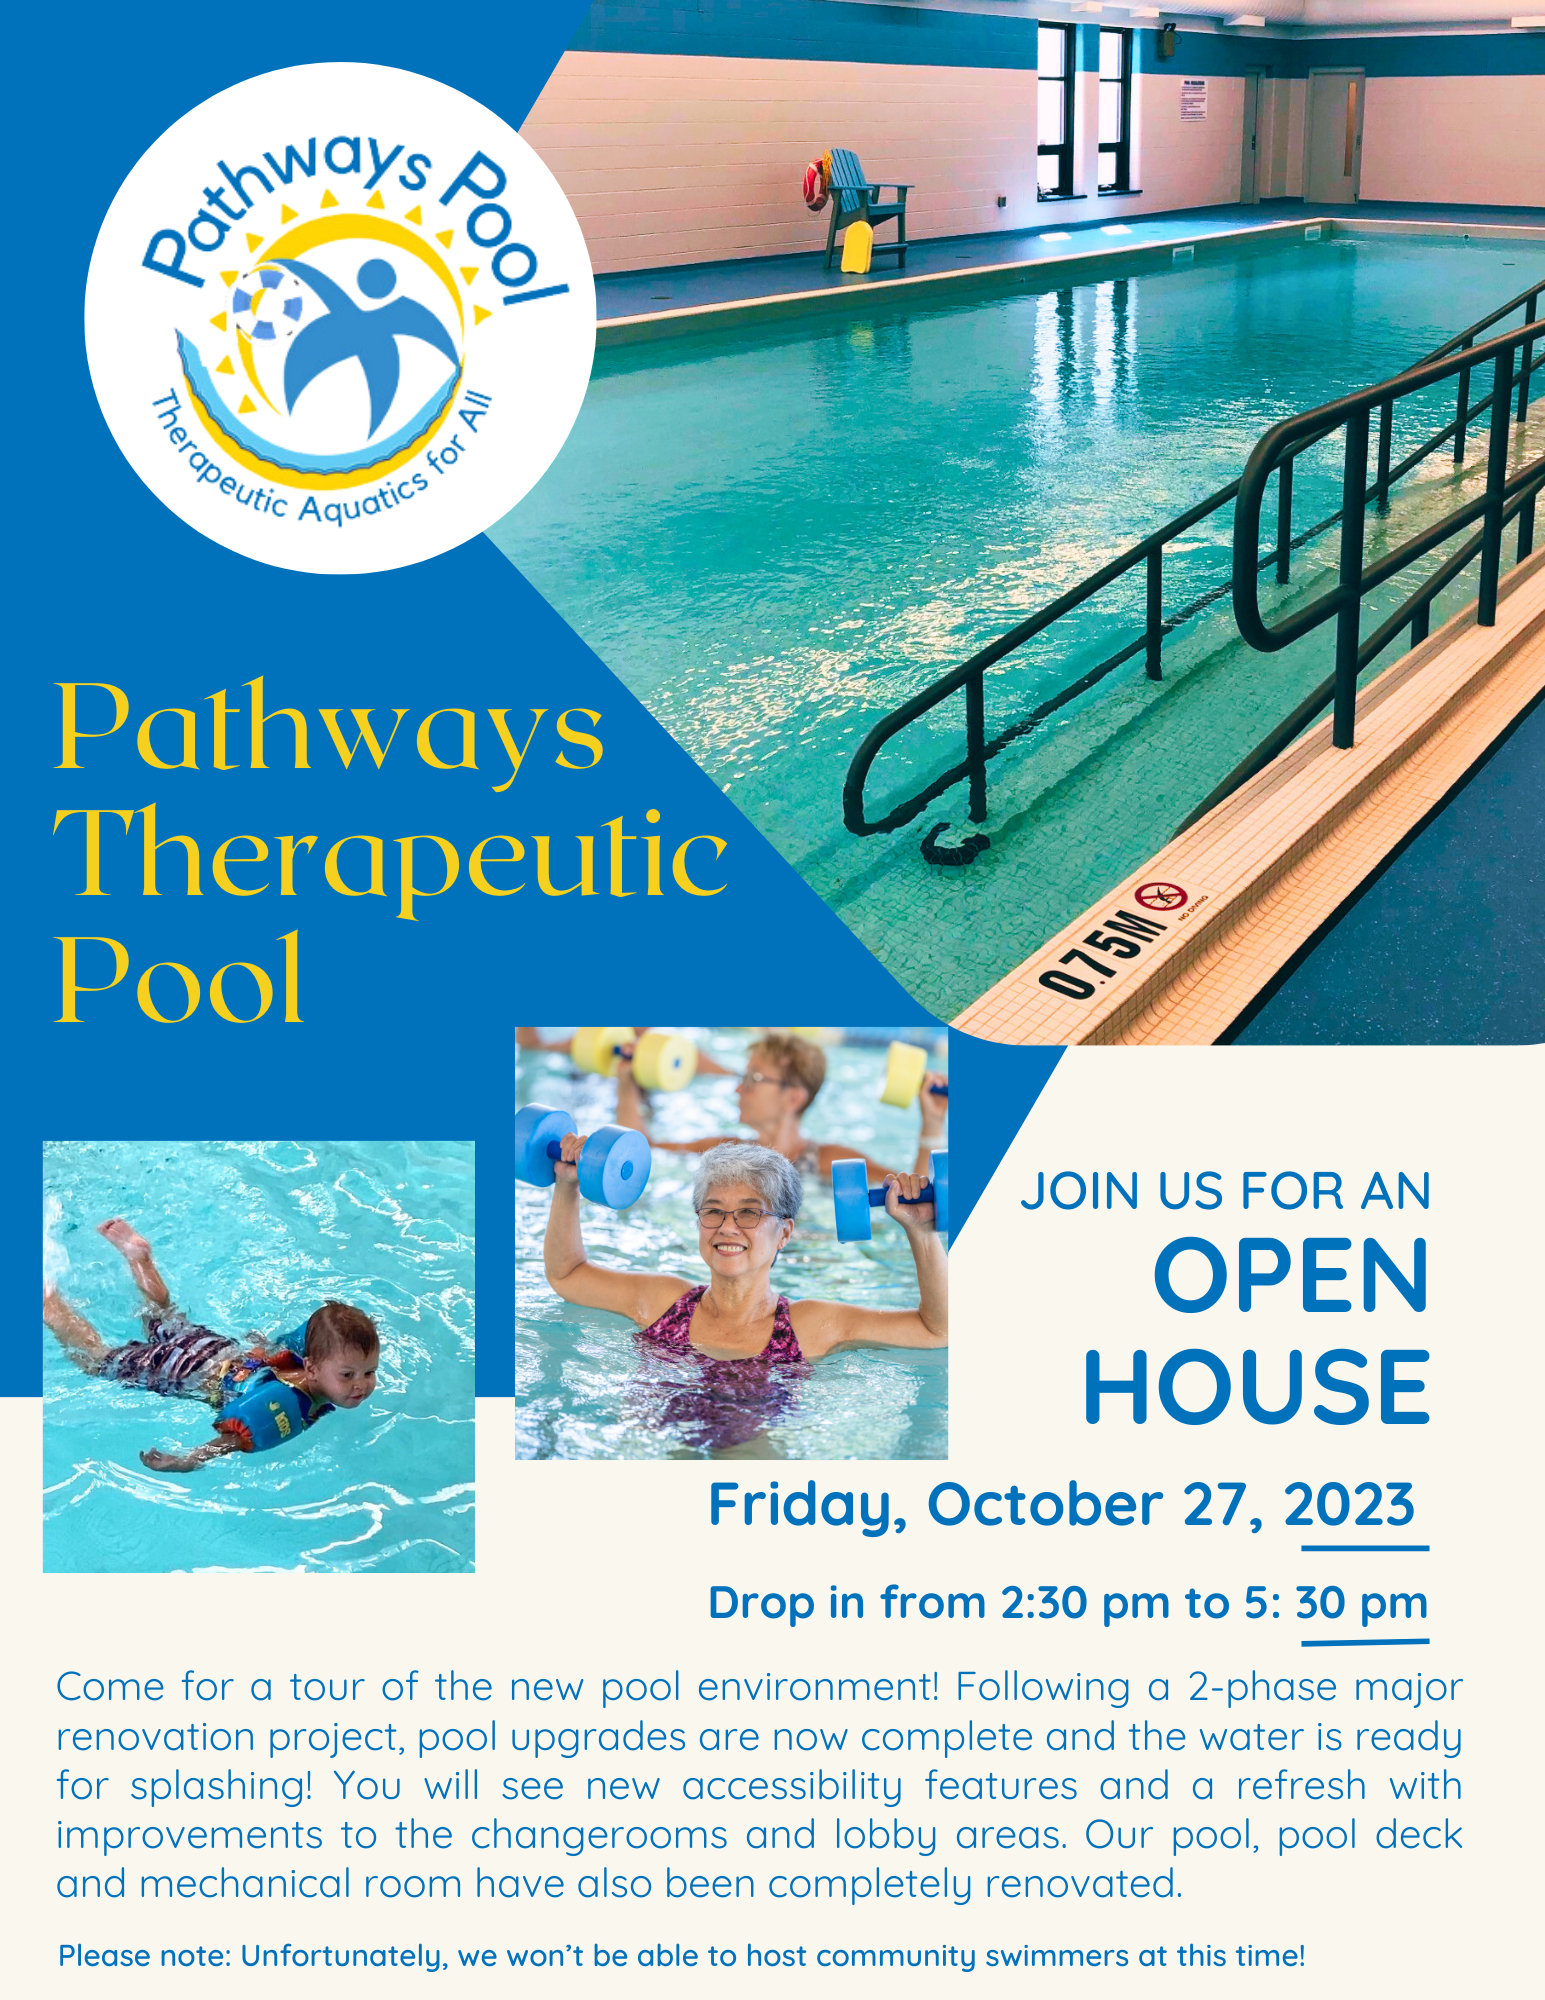 Celebrating the Re-Opening of the Therapeutic Pool